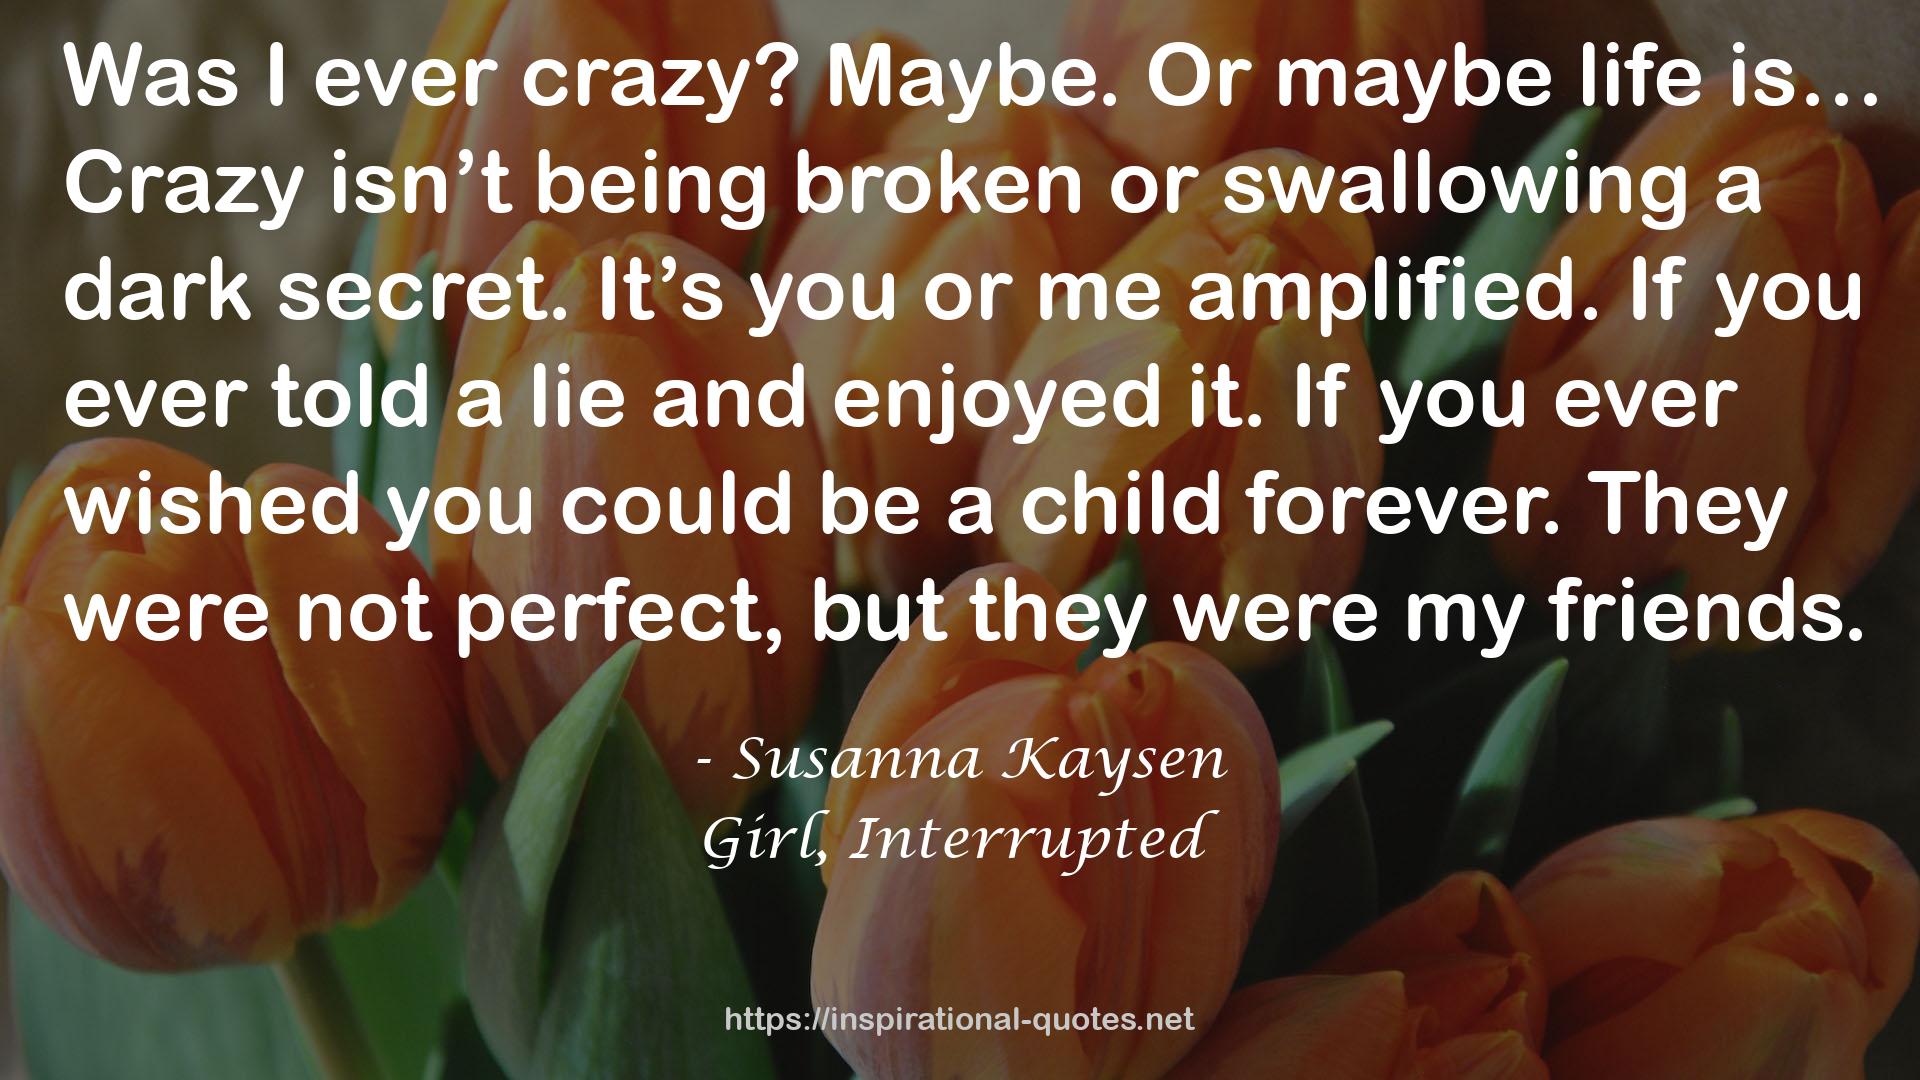 Girl, Interrupted QUOTES